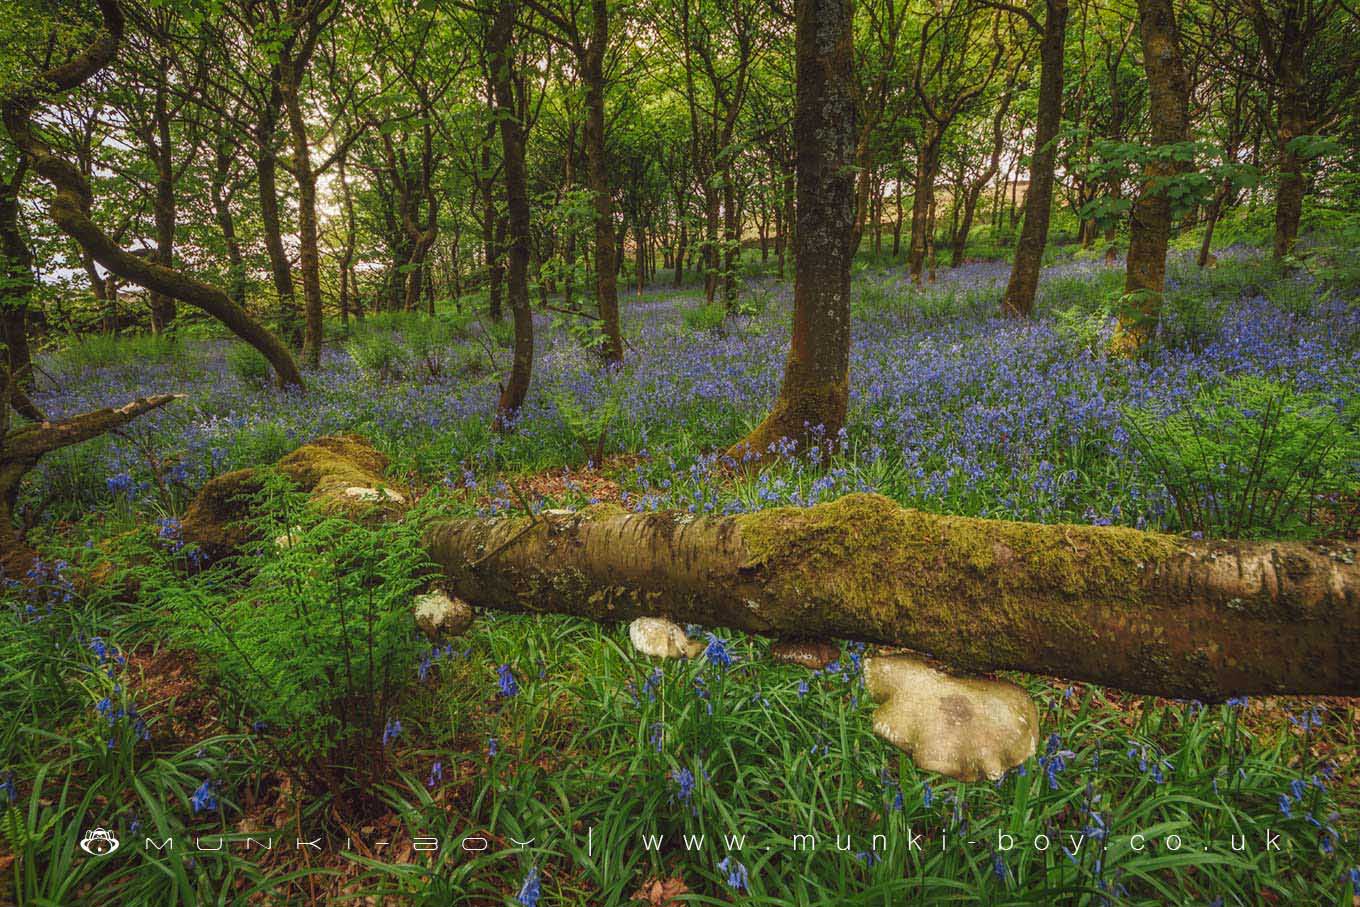 Bluebell Woods in Greater Manchester